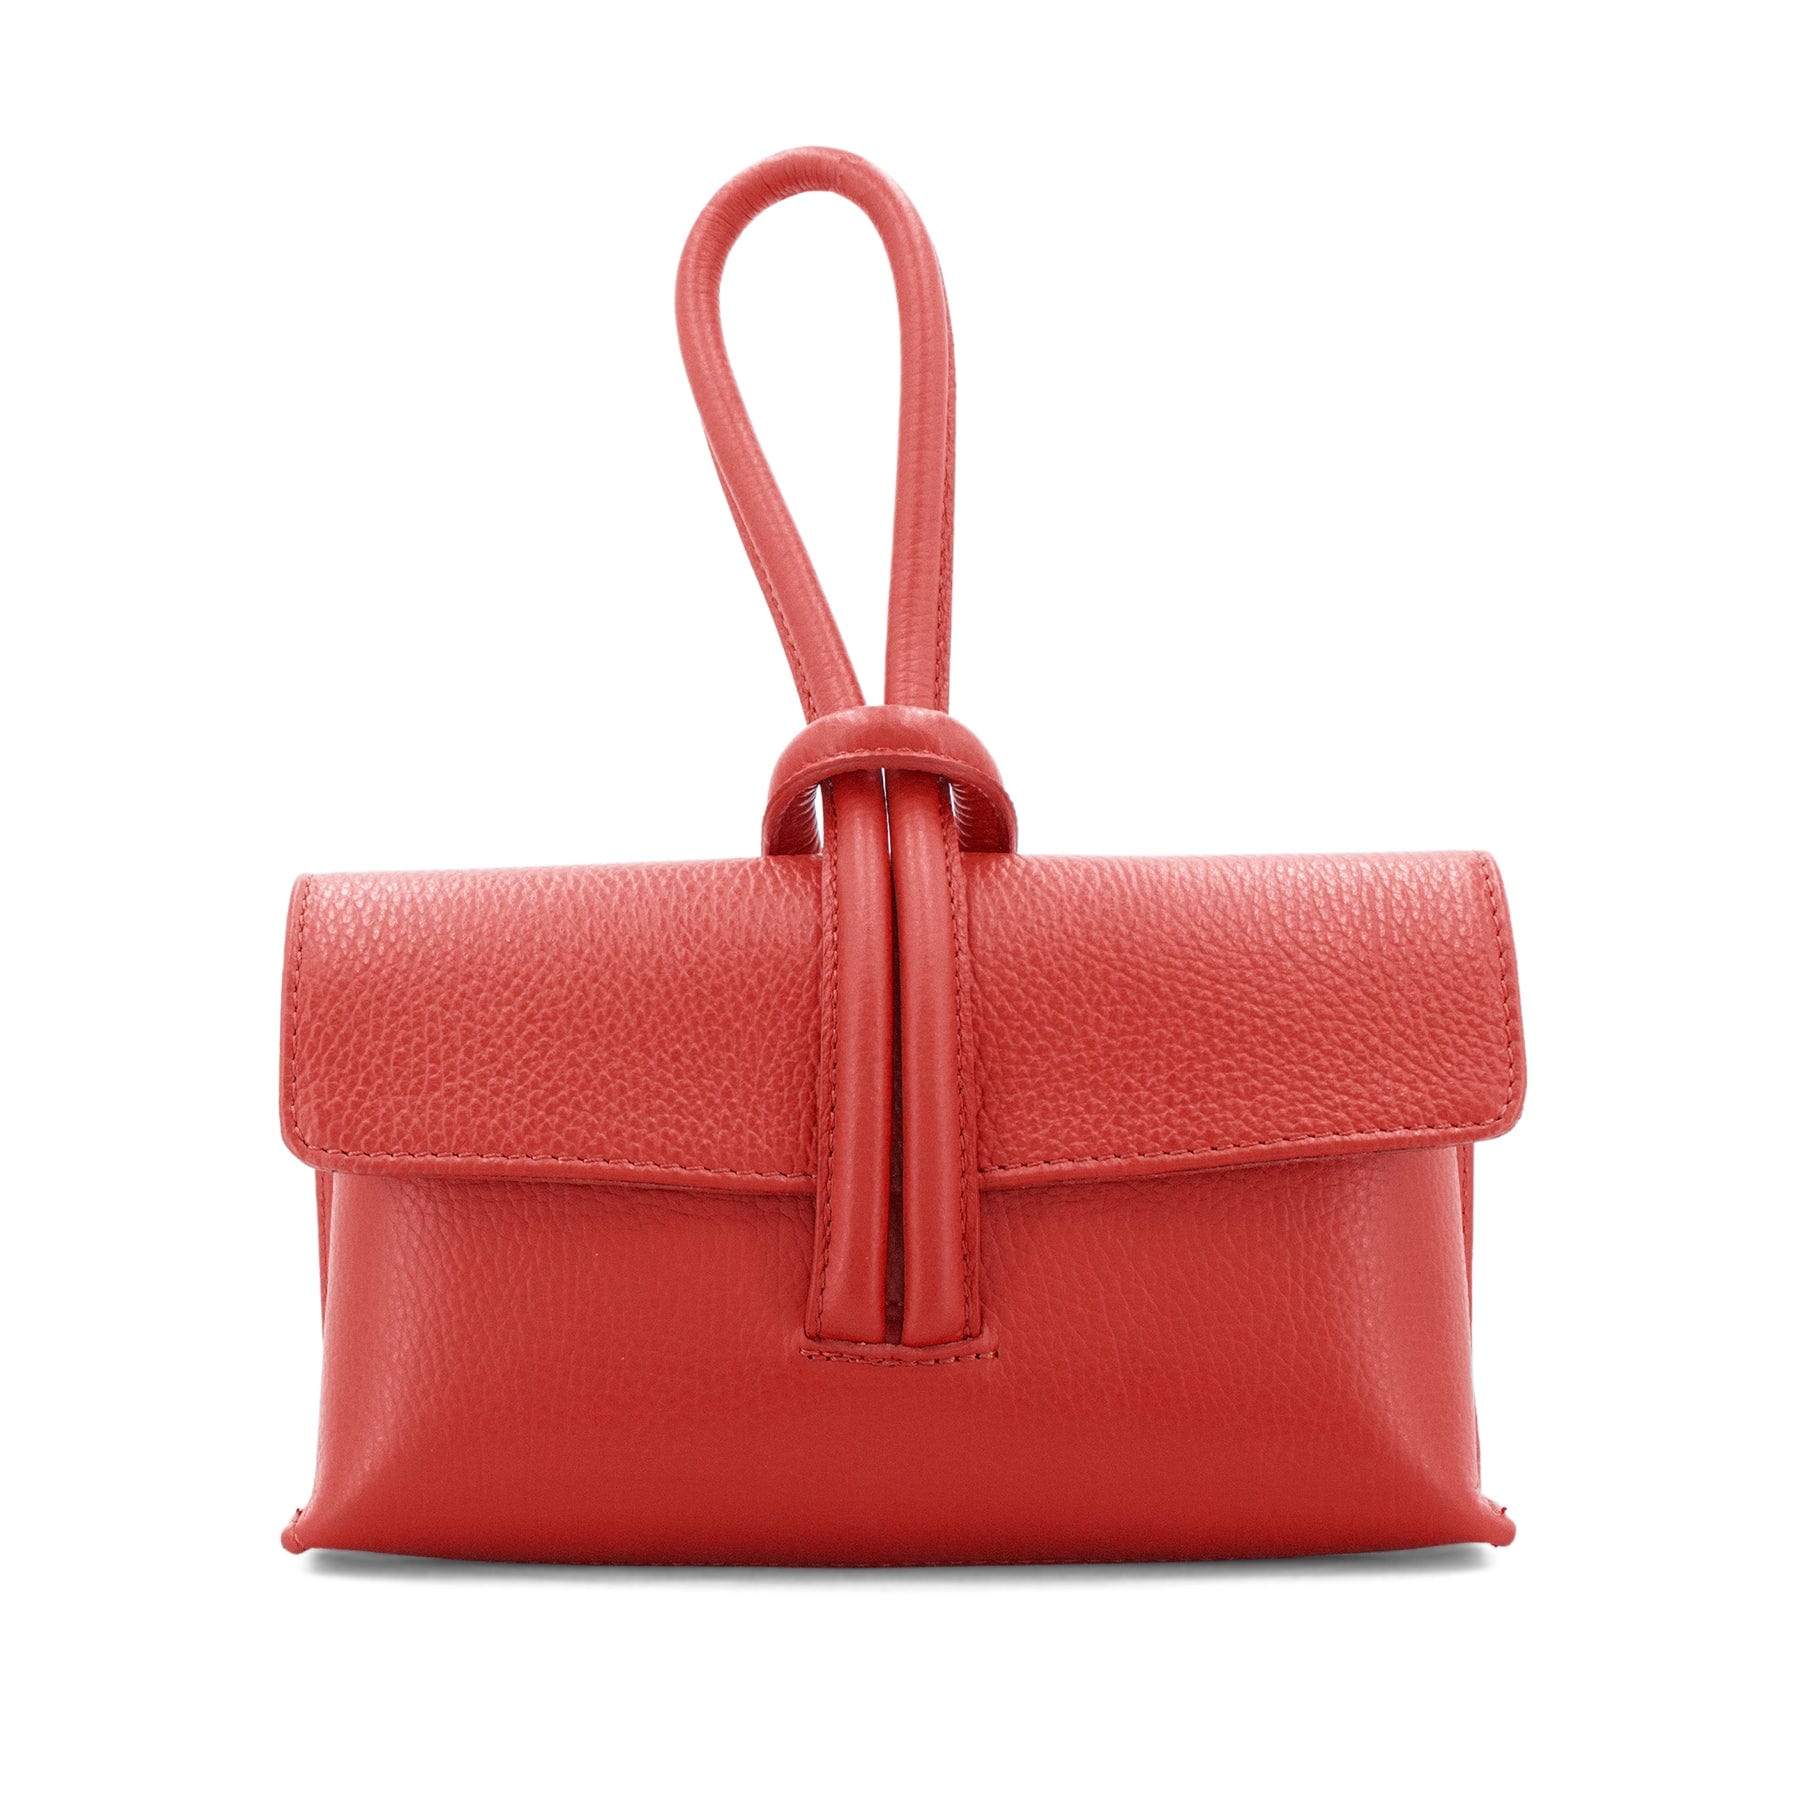 lusciousscarves Red Italian Leather Clutch Bag, Evening Bag with Loop Handle